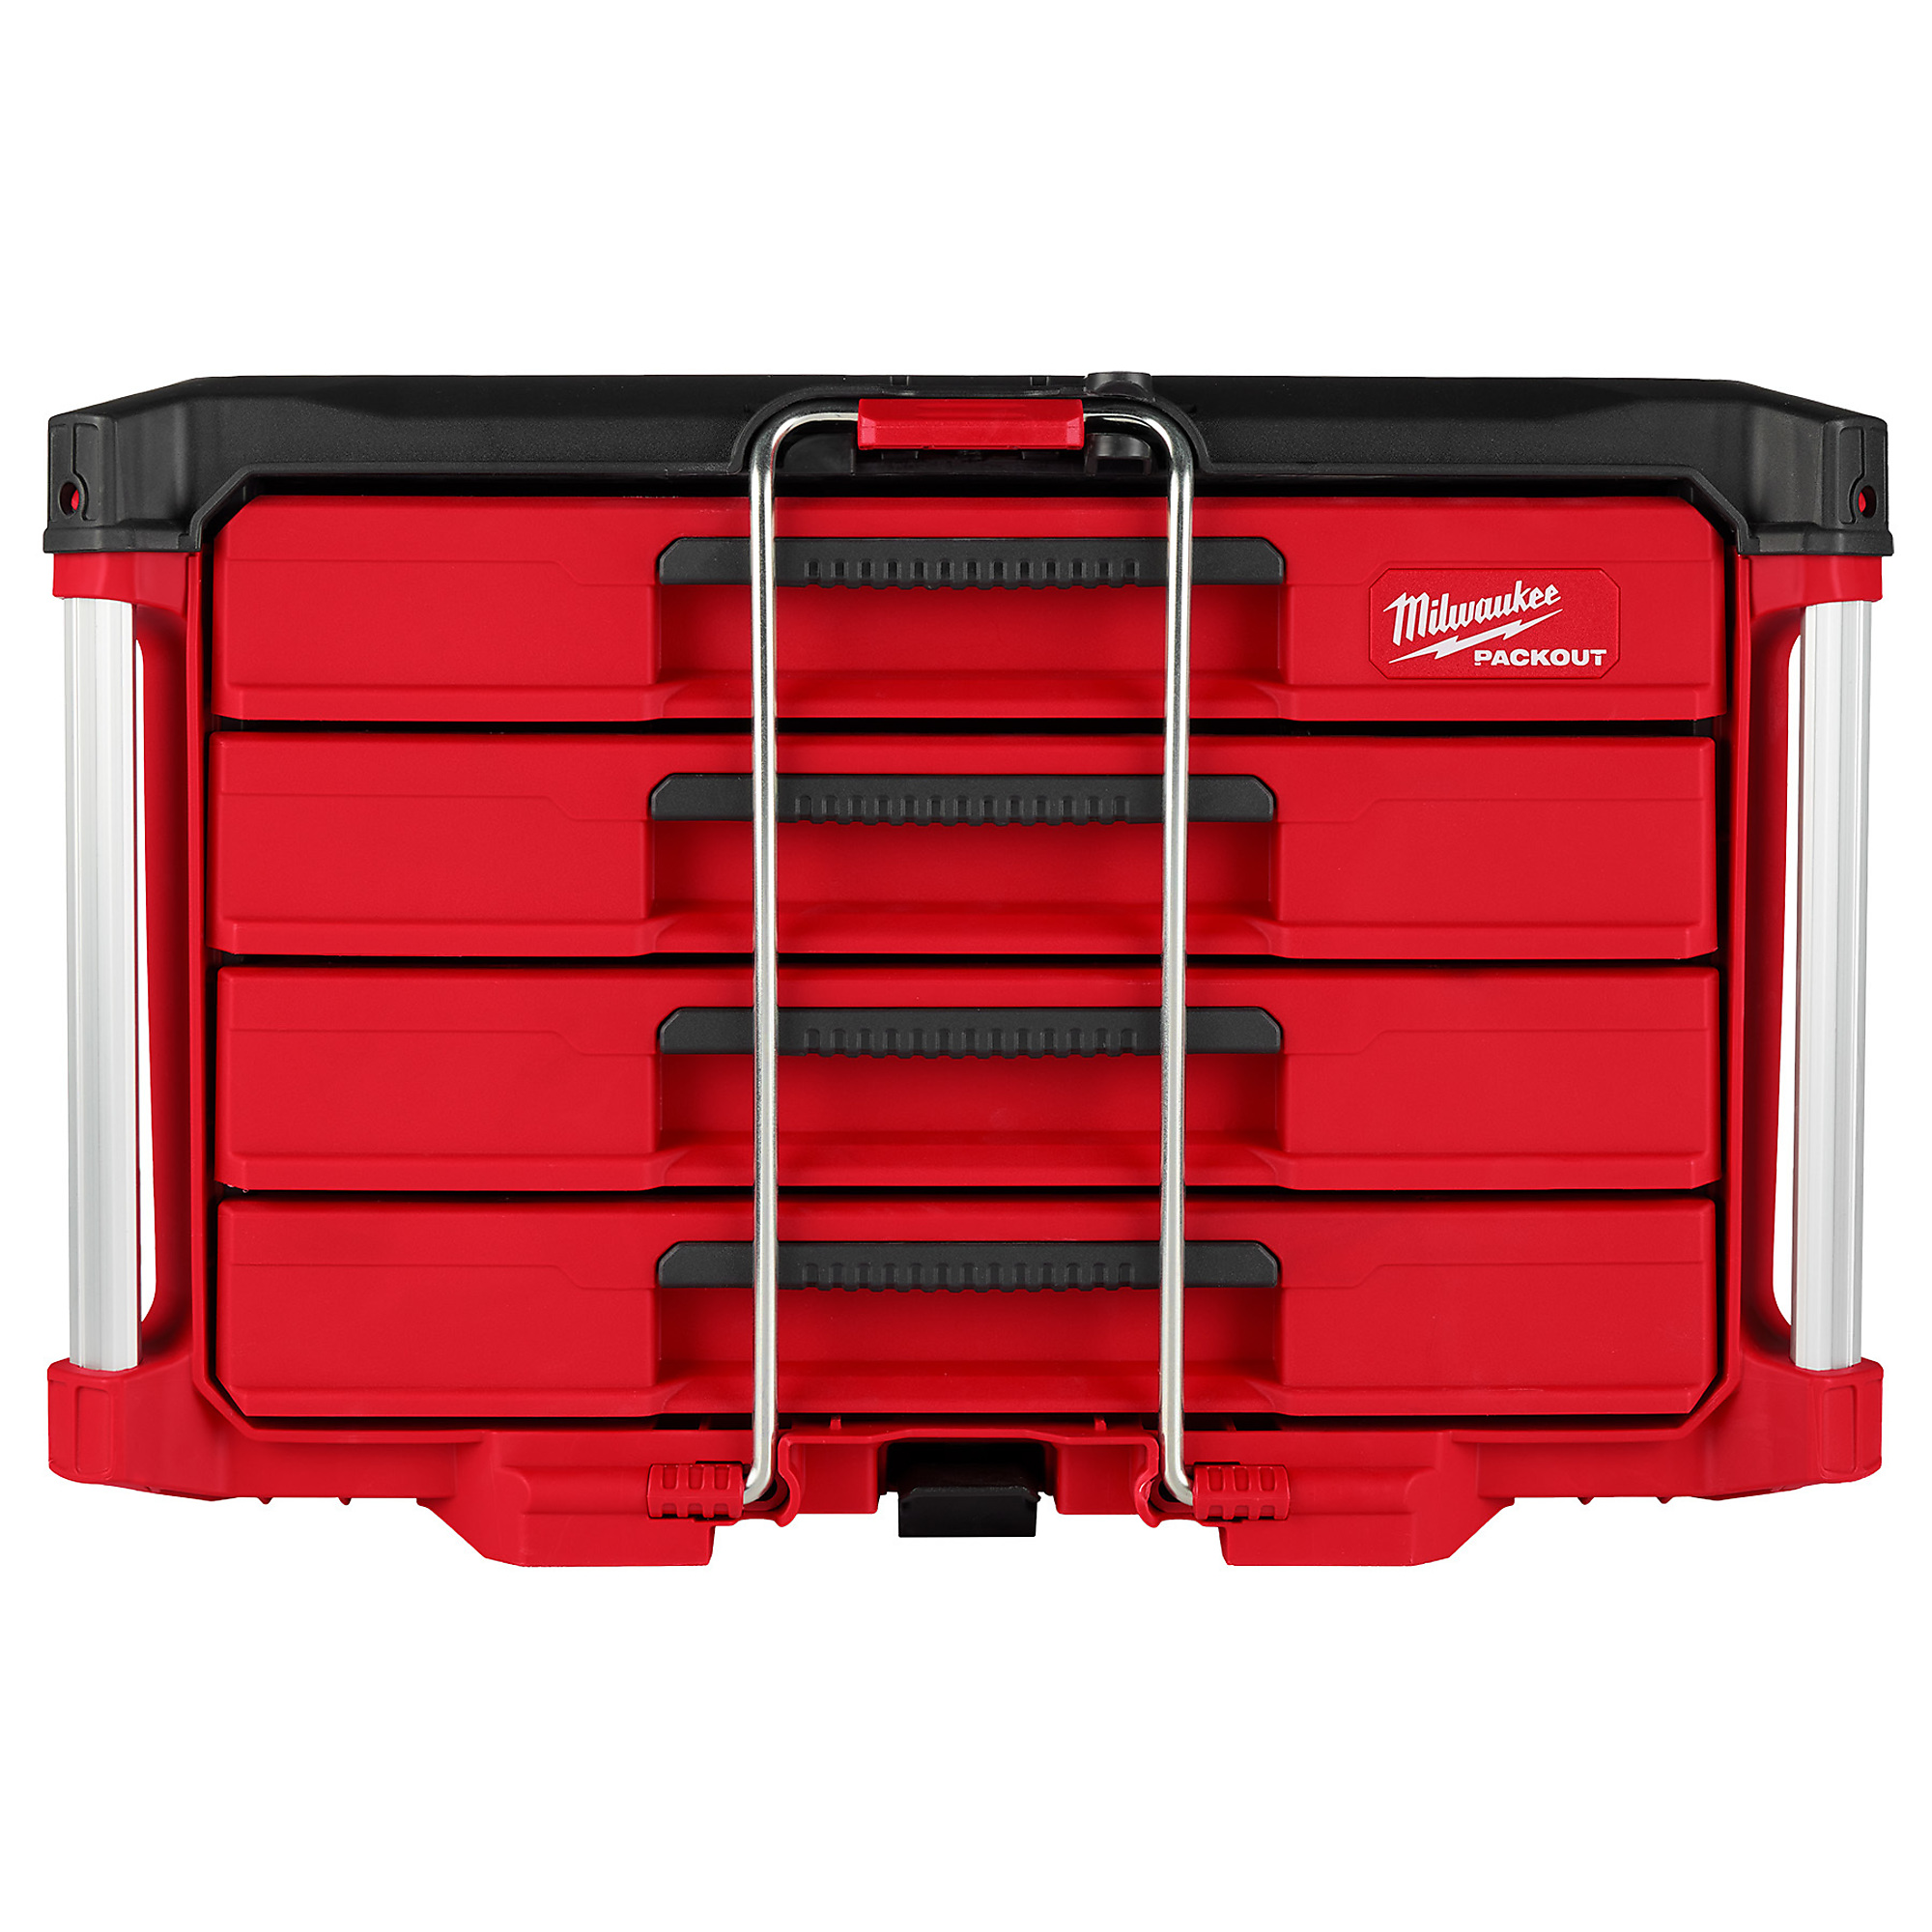 Milwaukee packout Tool Box Drawer Dividers Tool Box Dividers Organizer  Tools New